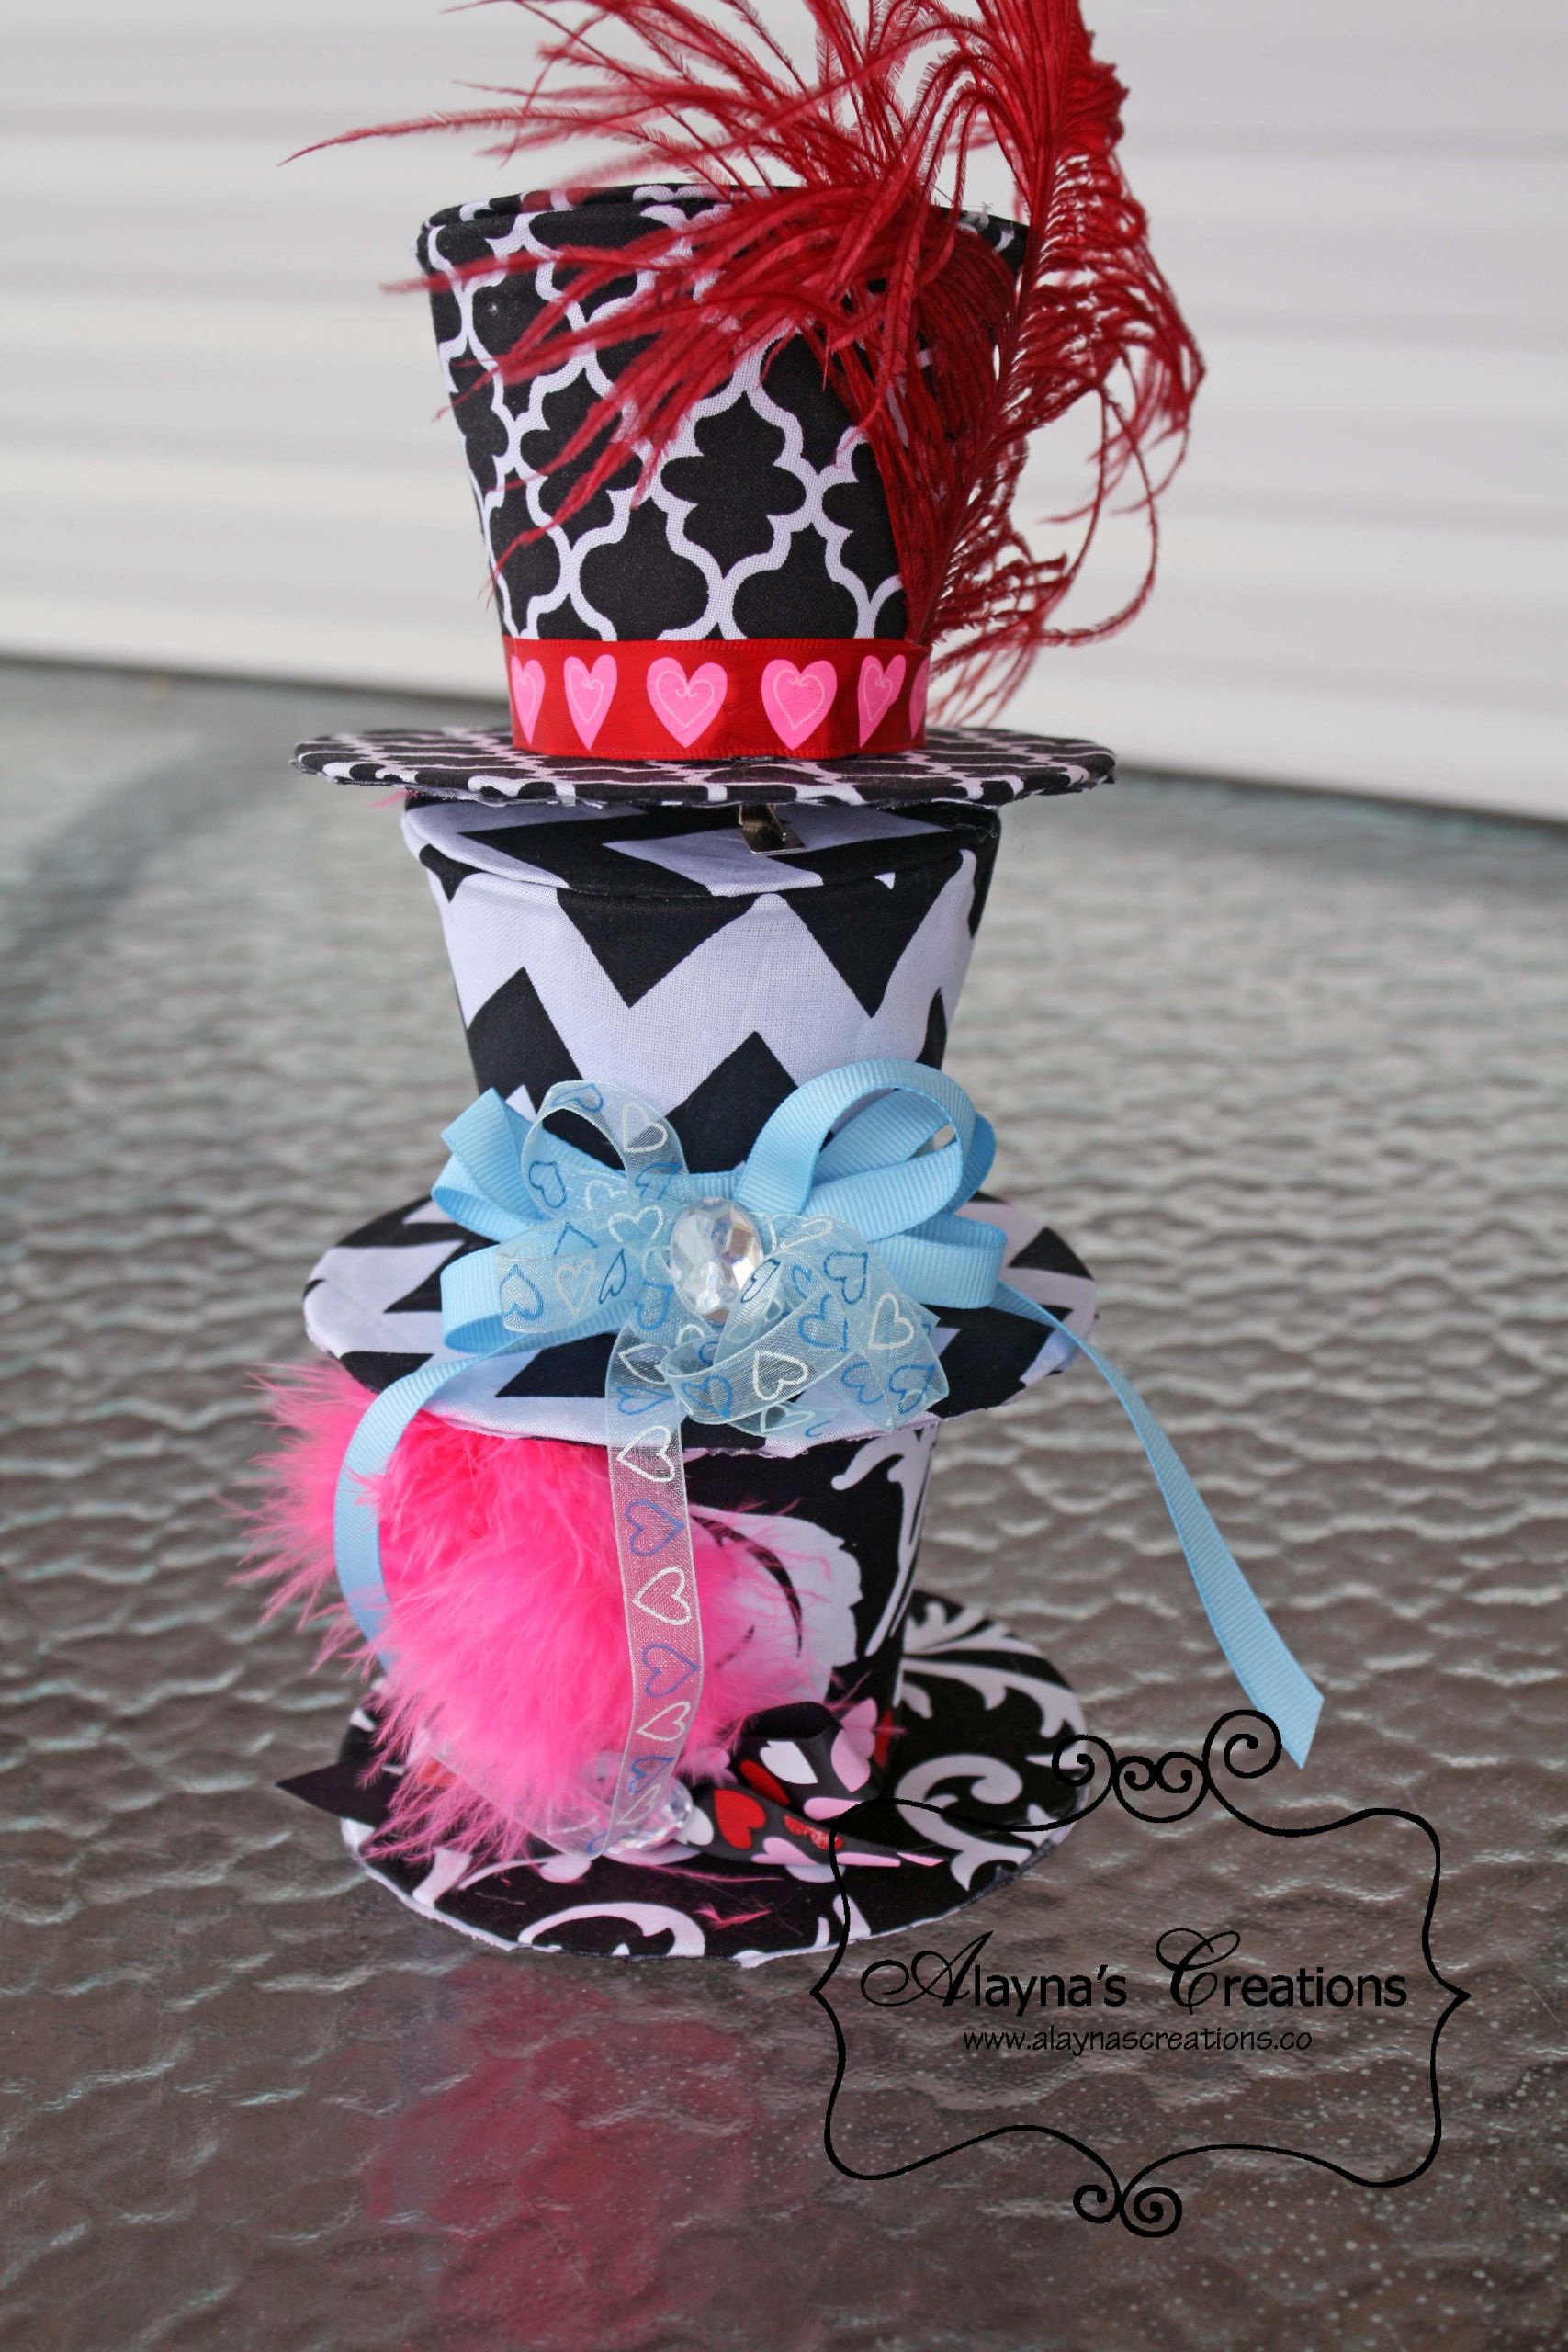 Mad Hatter Tea Party Hats Ideas
 30 Ideas for Mad Hatters Tea Party Hat Ideas Best Party